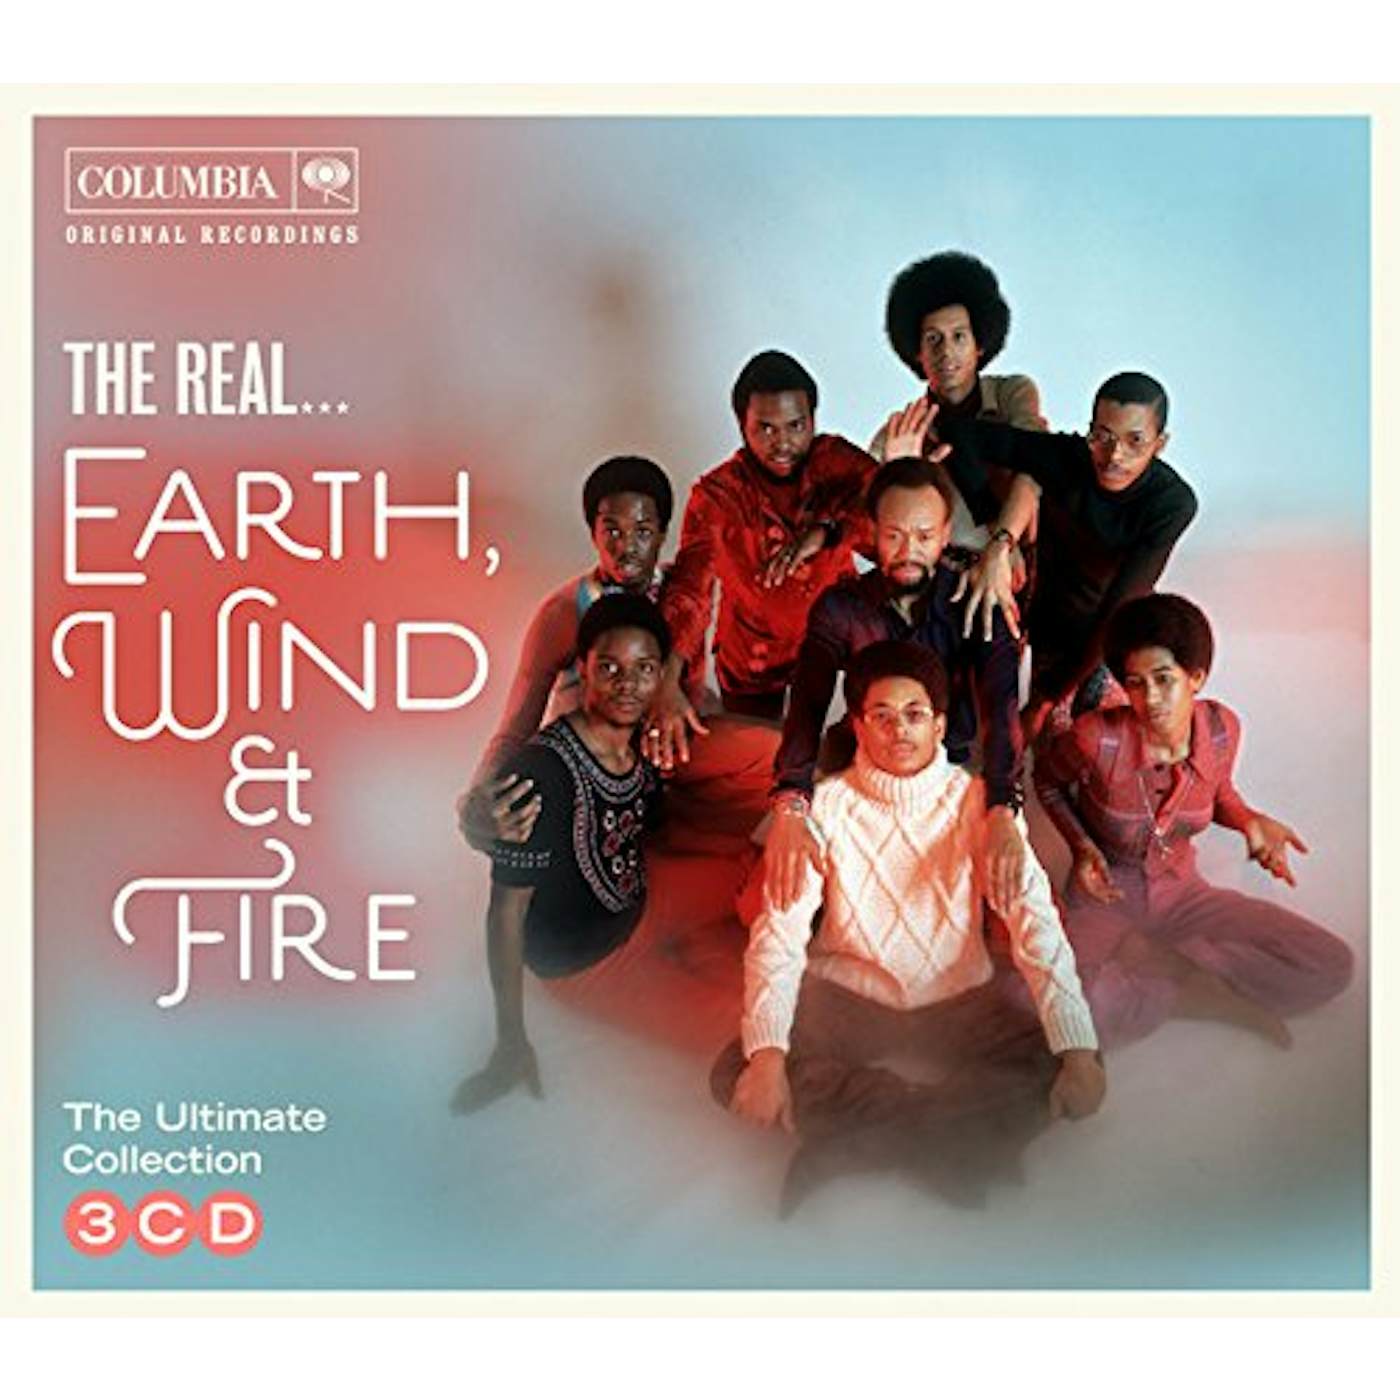 REAL Earth, Wind & Fire CD